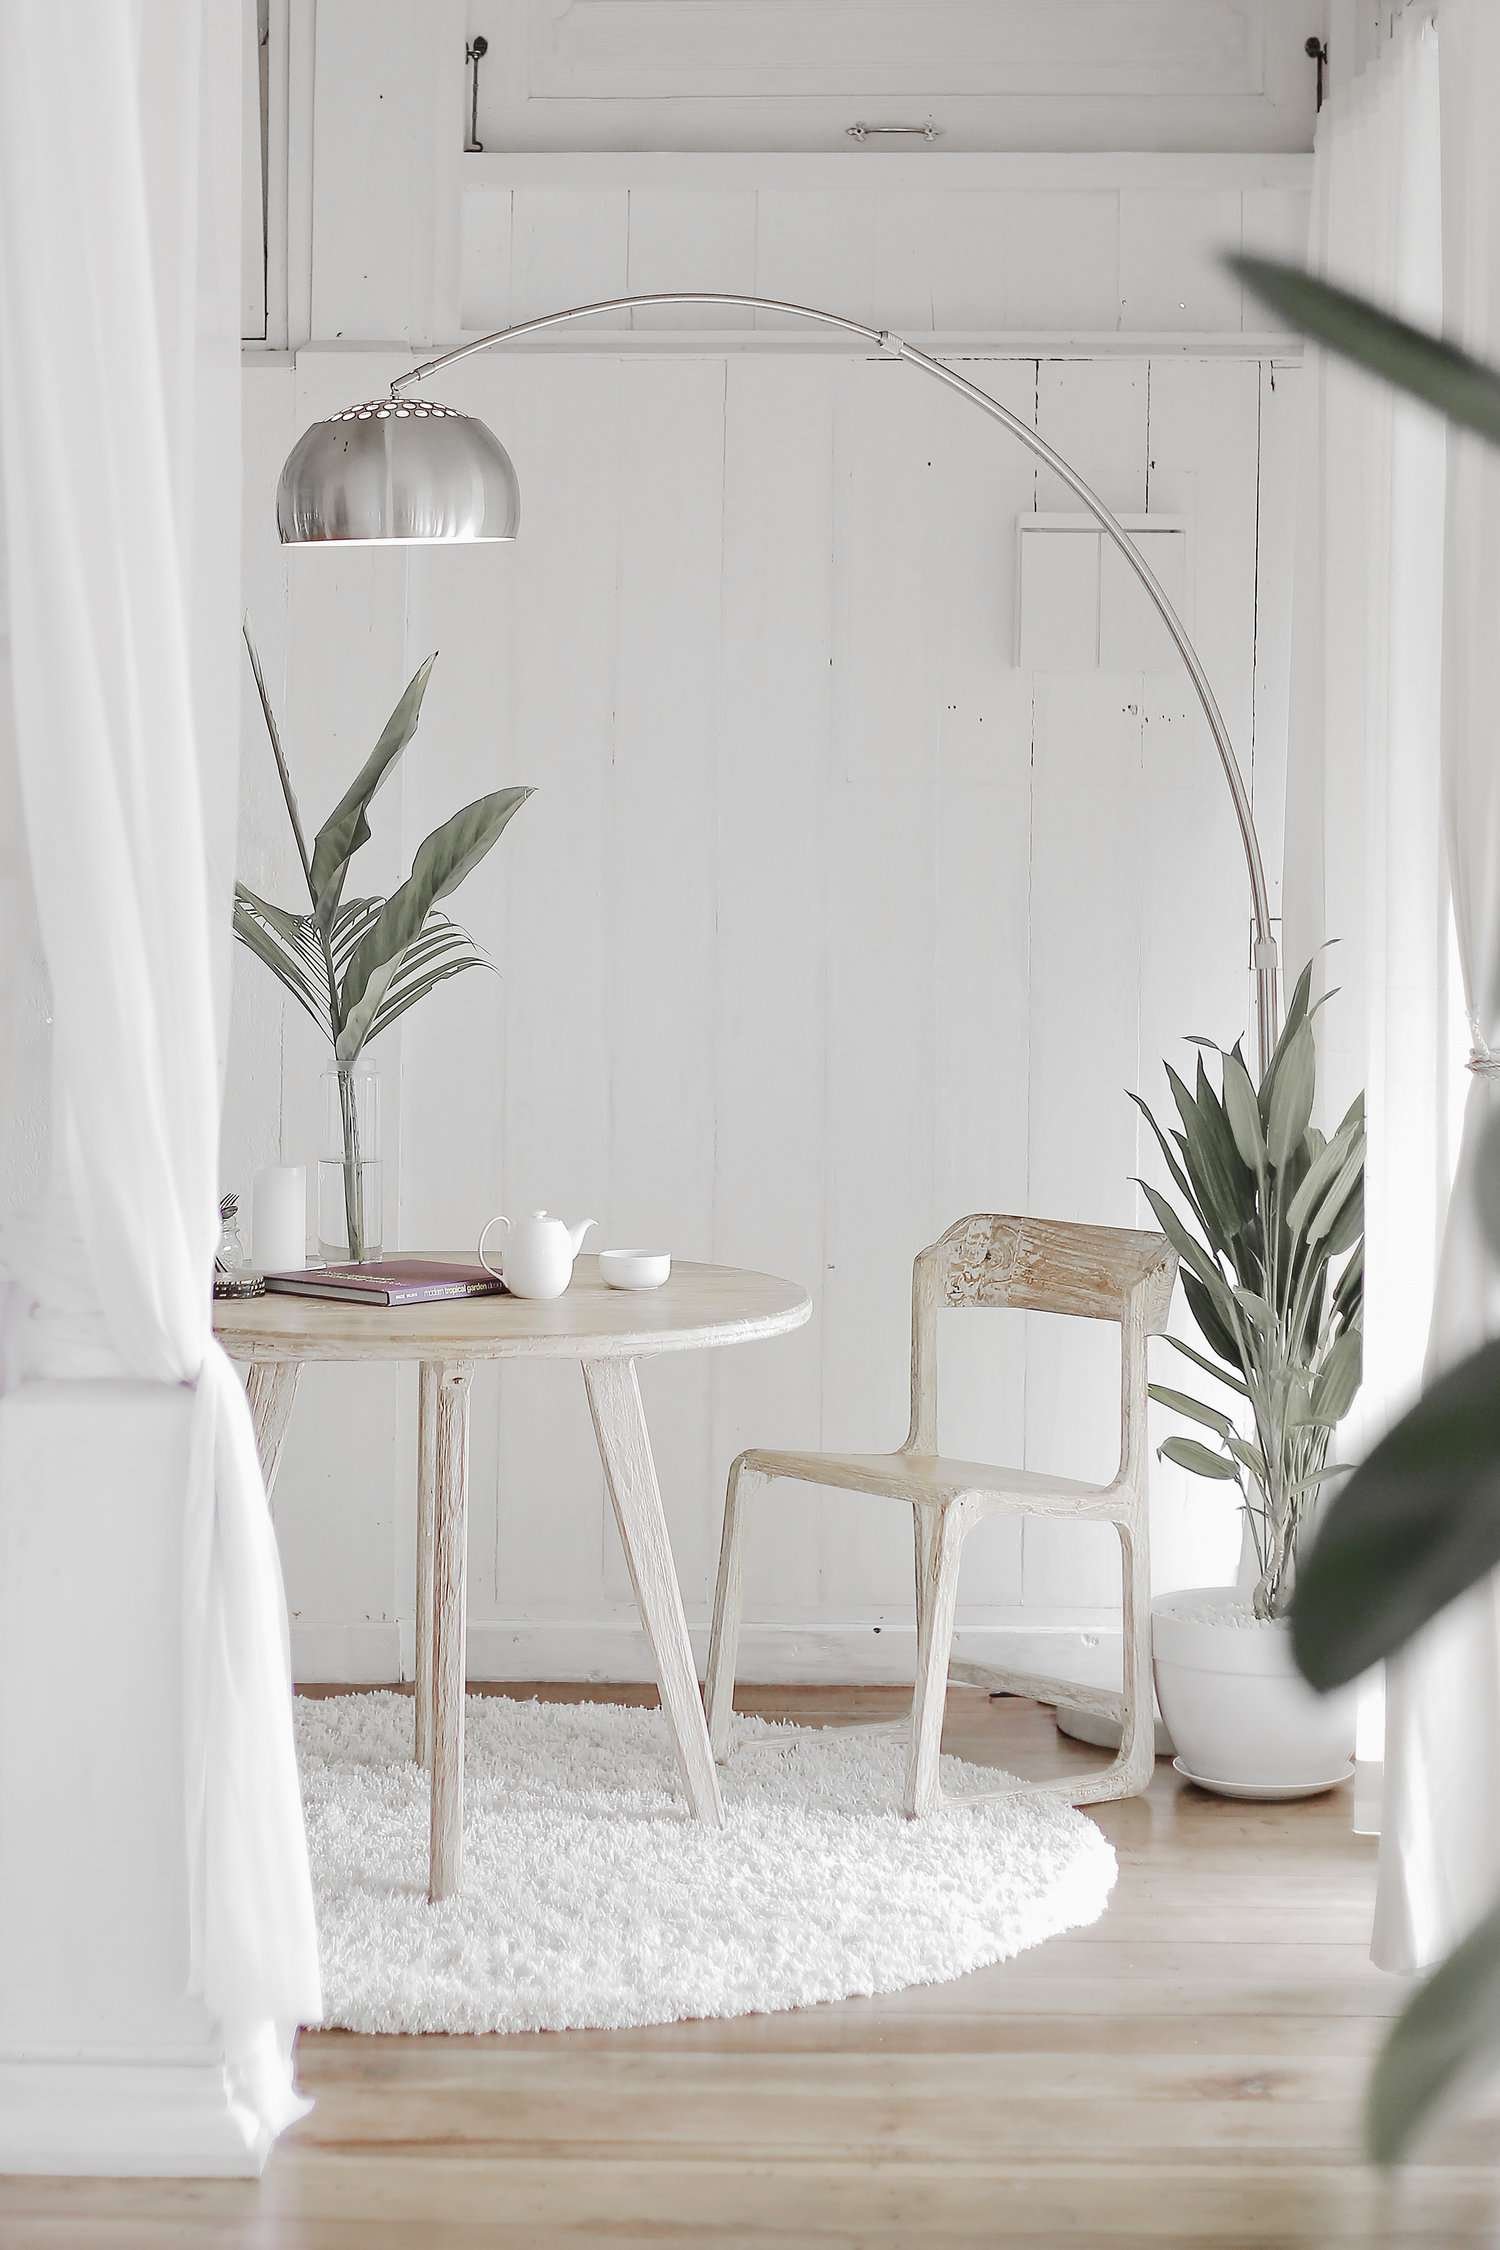 Ideas for small rooms: Use white paint and white furniture to make the room look bigger and wider